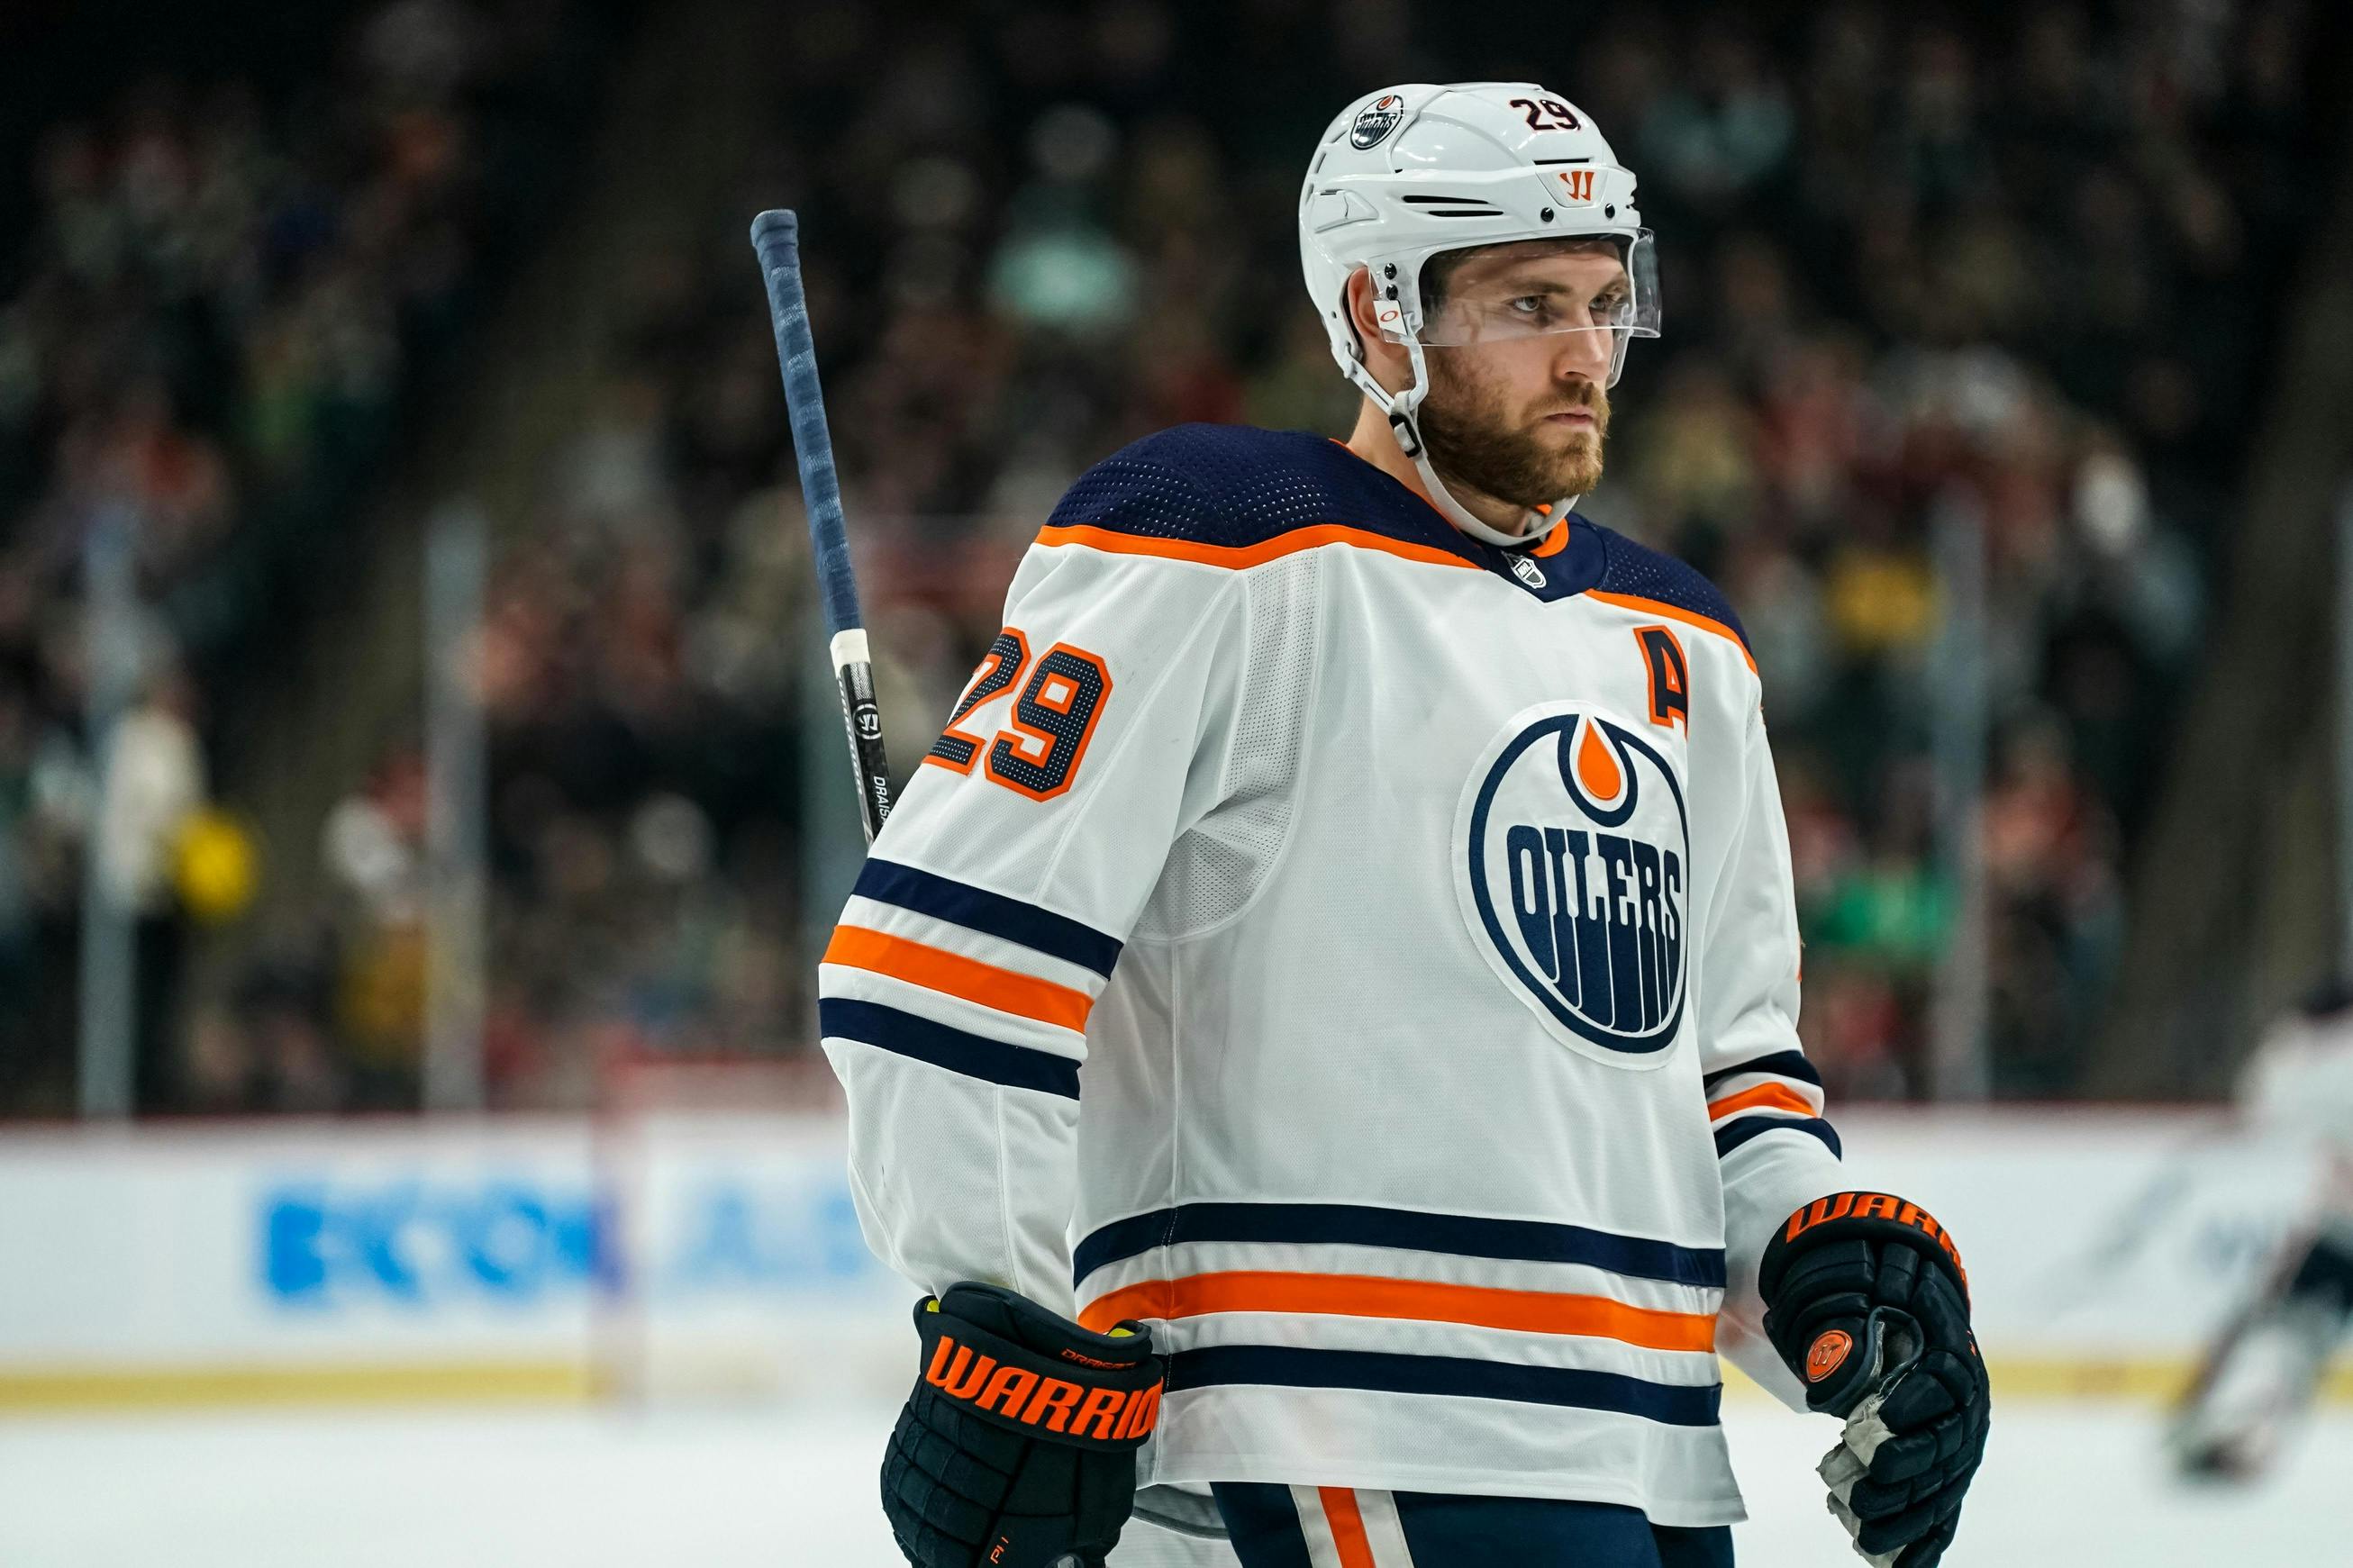 Player grades: Leon Draisaitl leads the charge as Oilers snipers